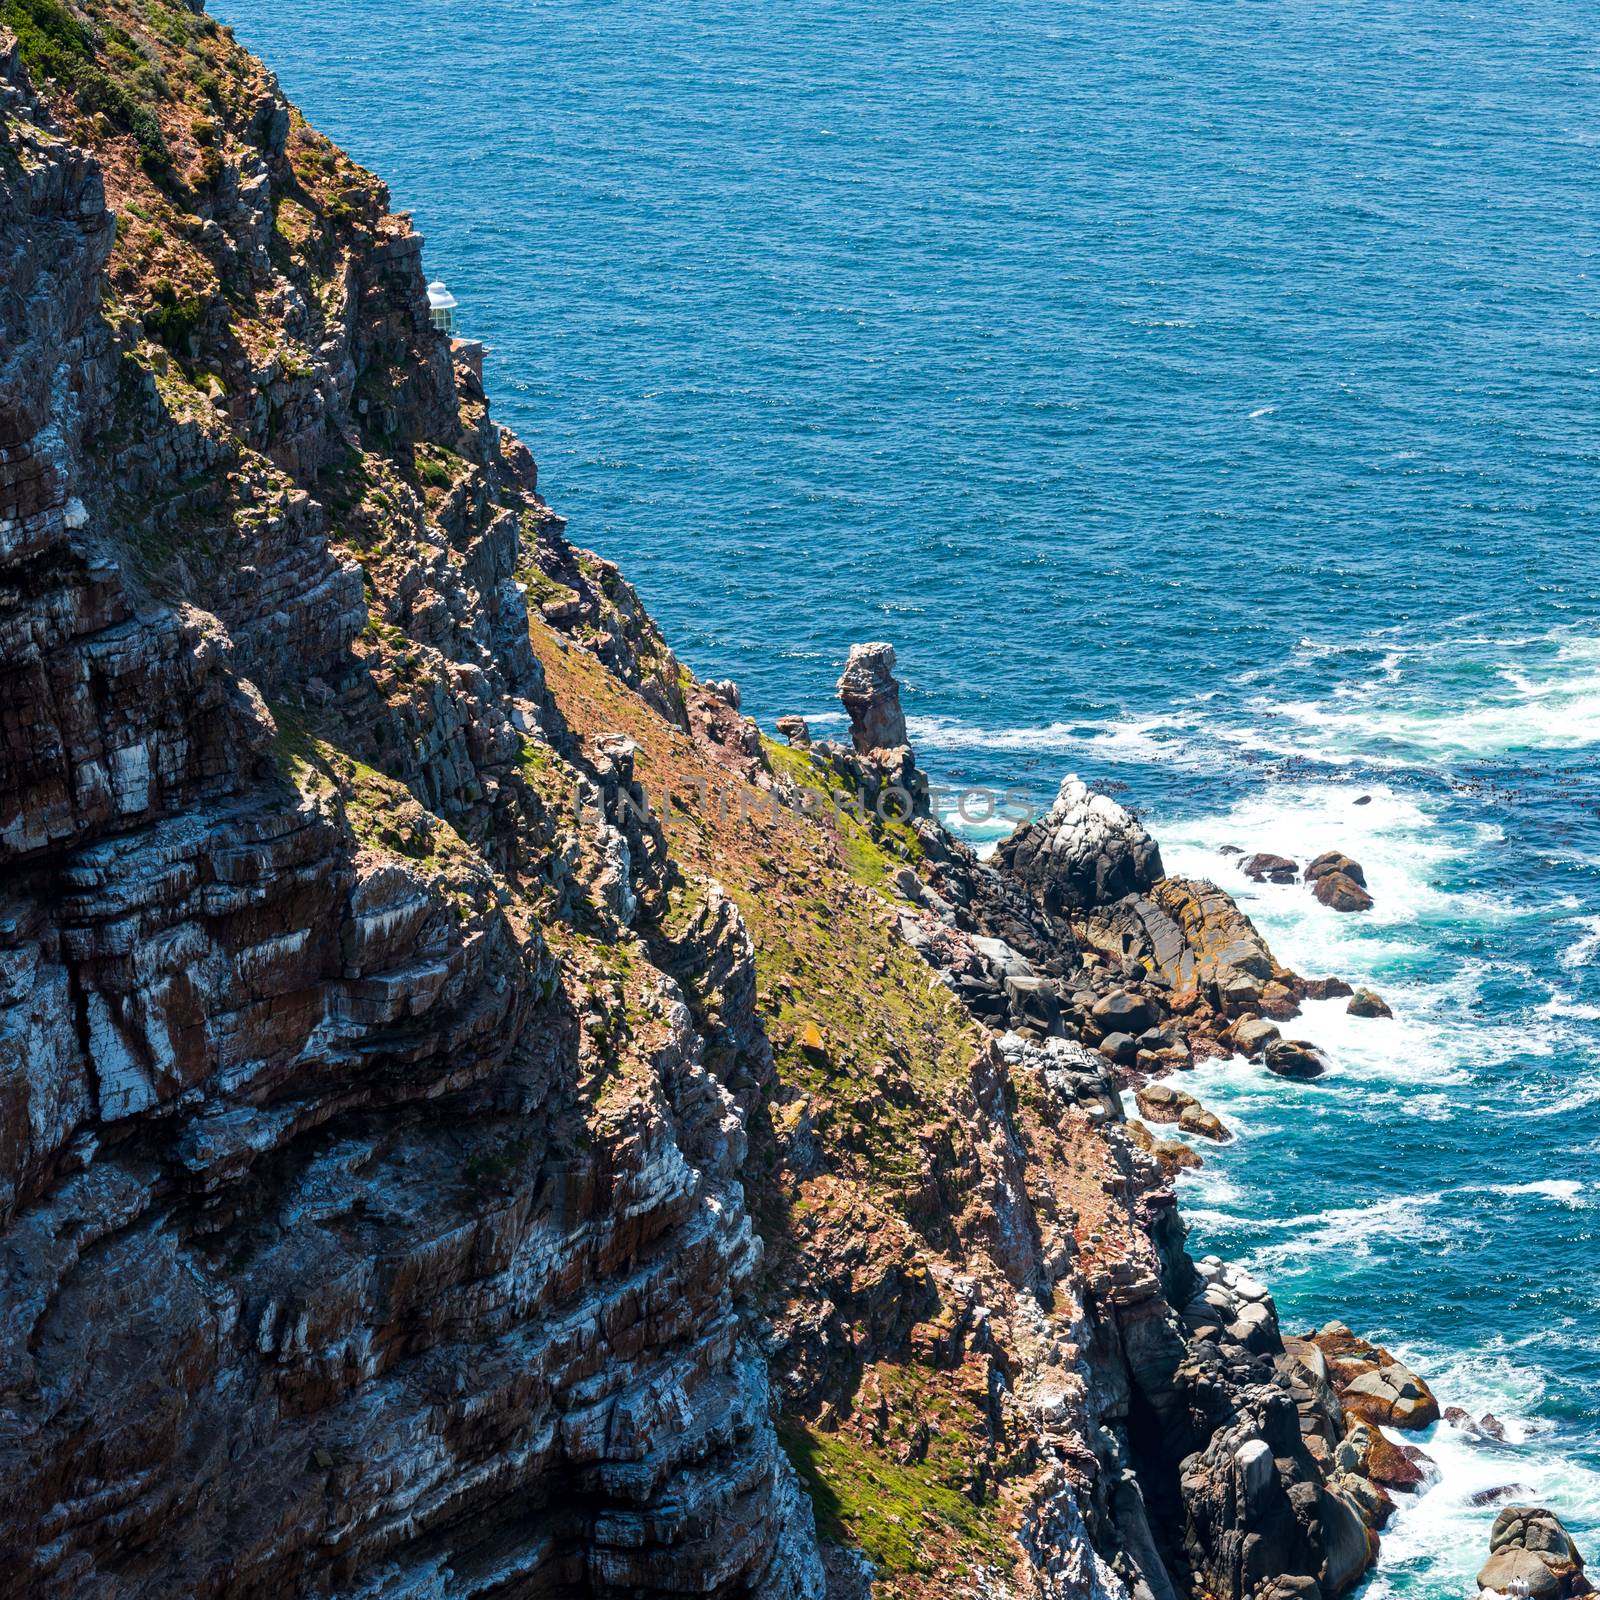 Looking down a very steep cliff to the ocean below at the Cape of Good Hope.